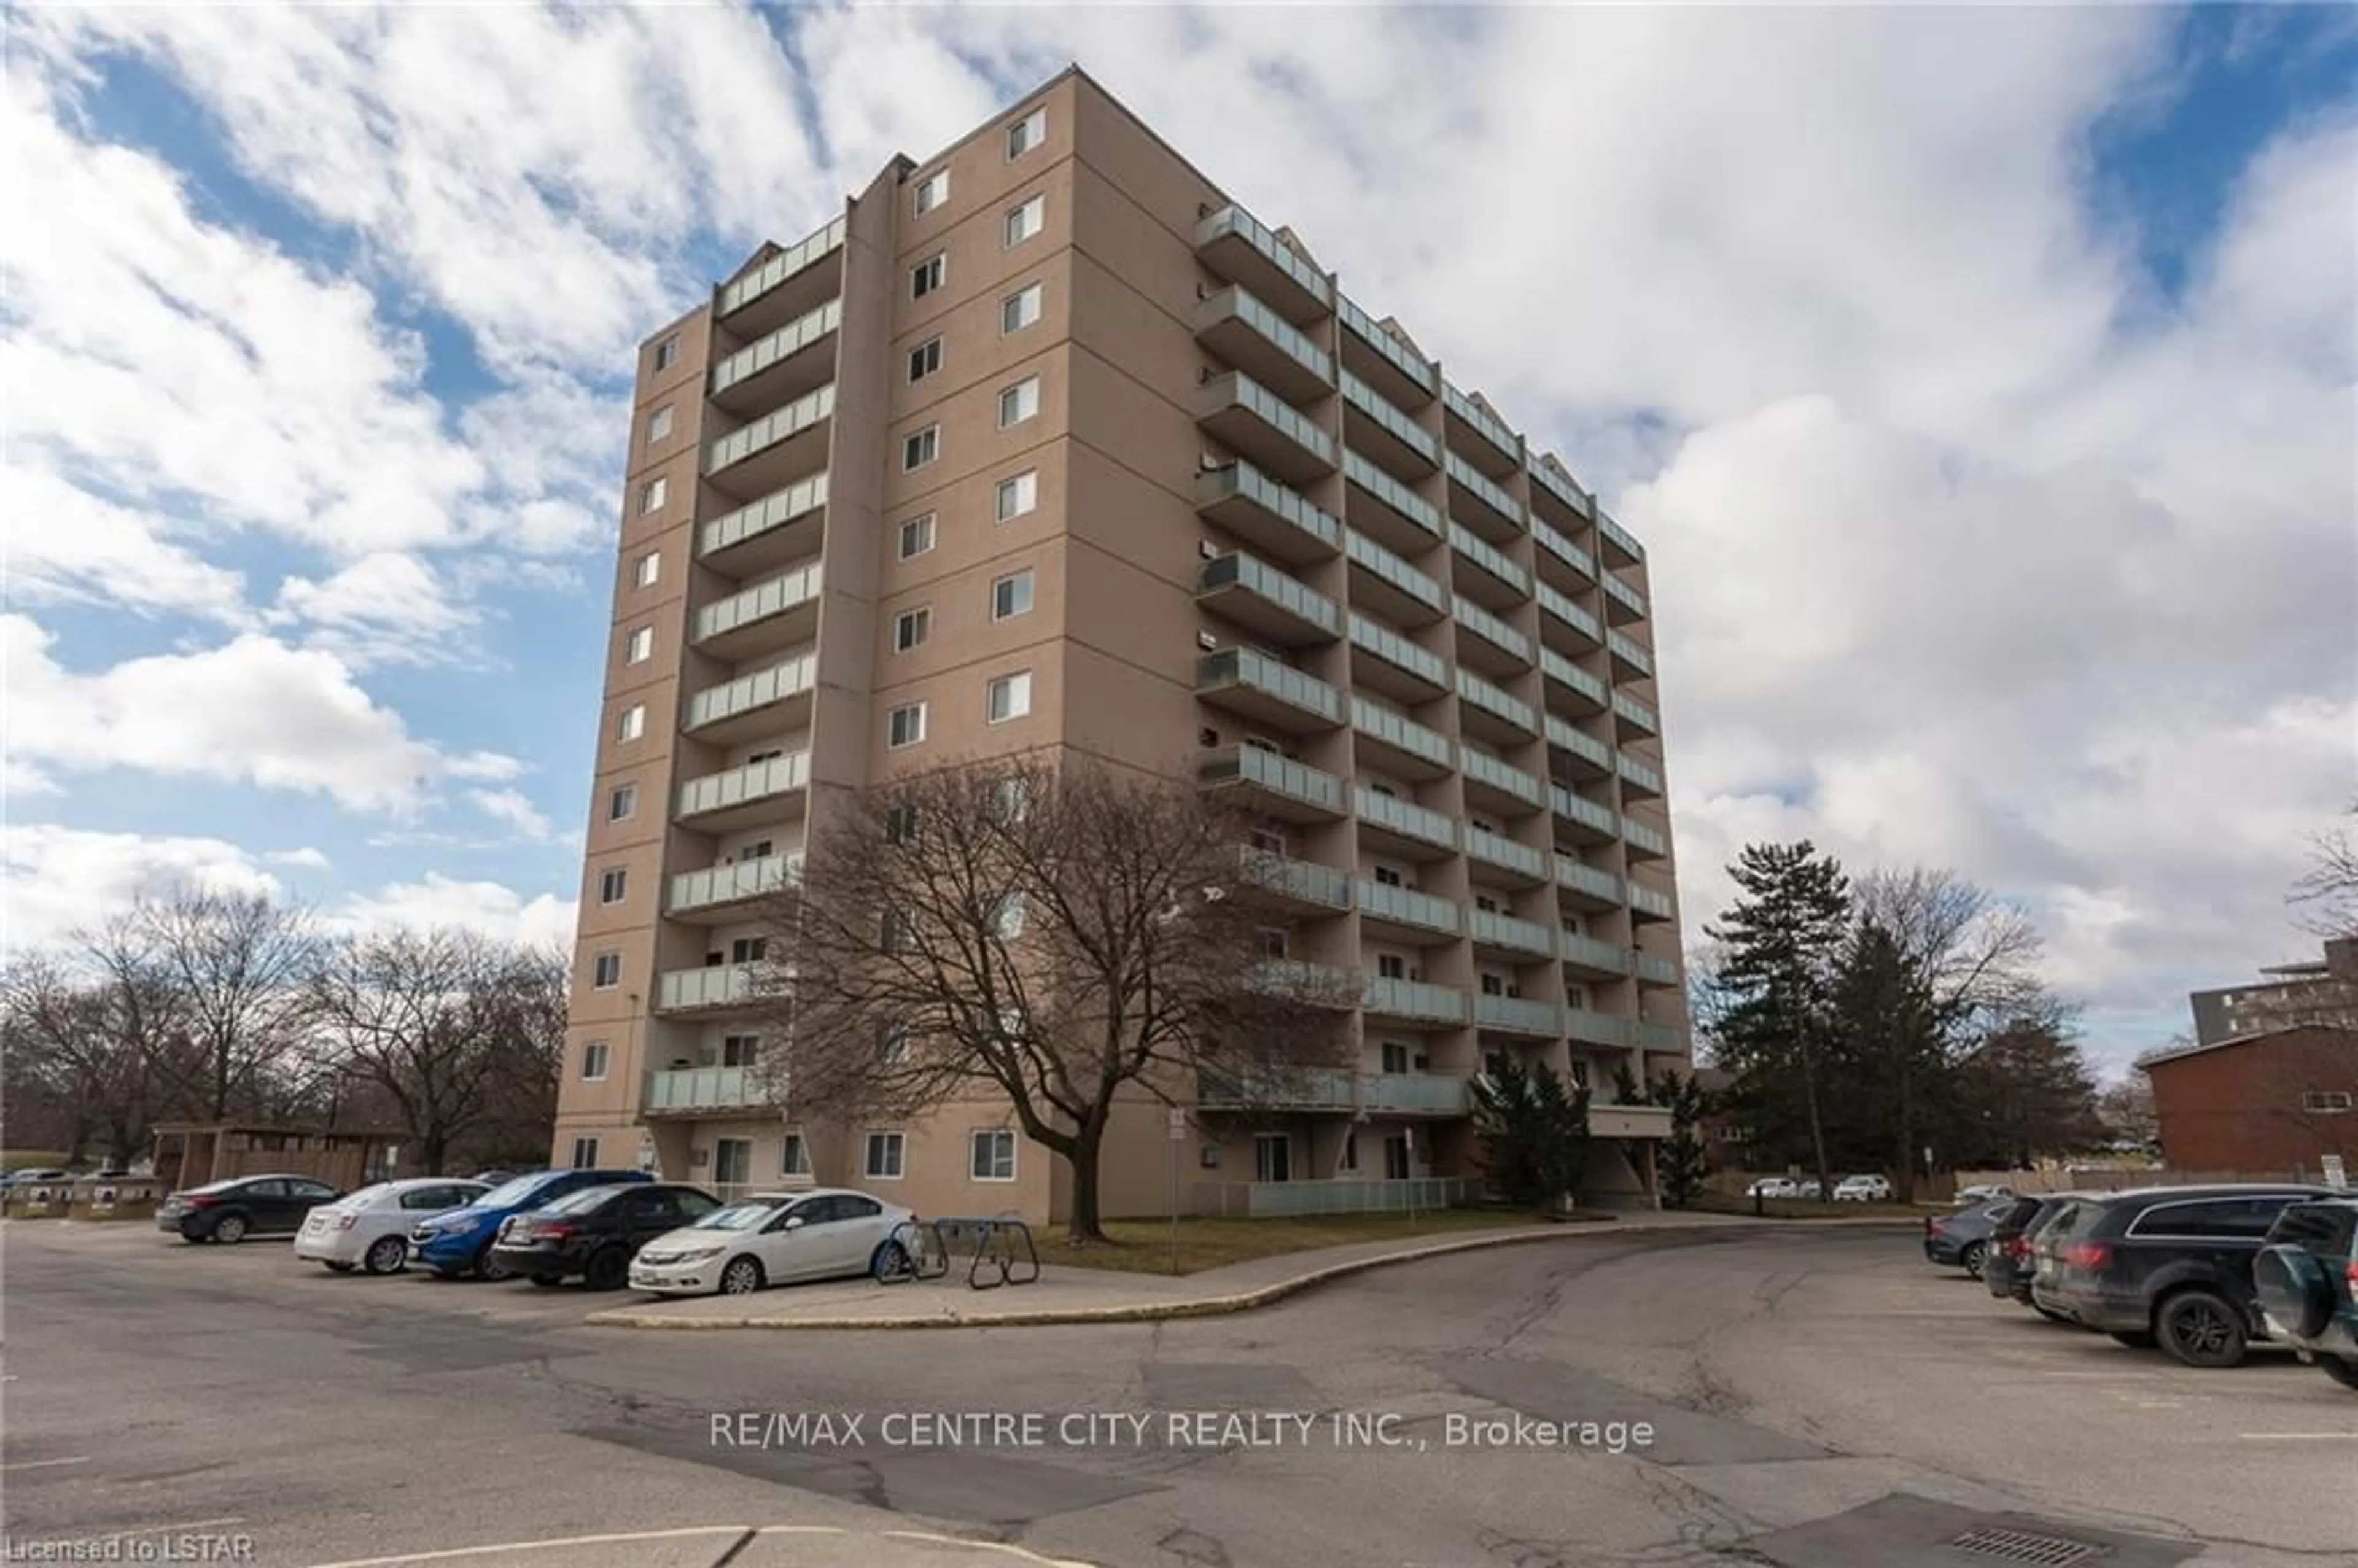 A pic from exterior of the house or condo for 563 Mornington Ave #302, London Ontario N5Y 4T8